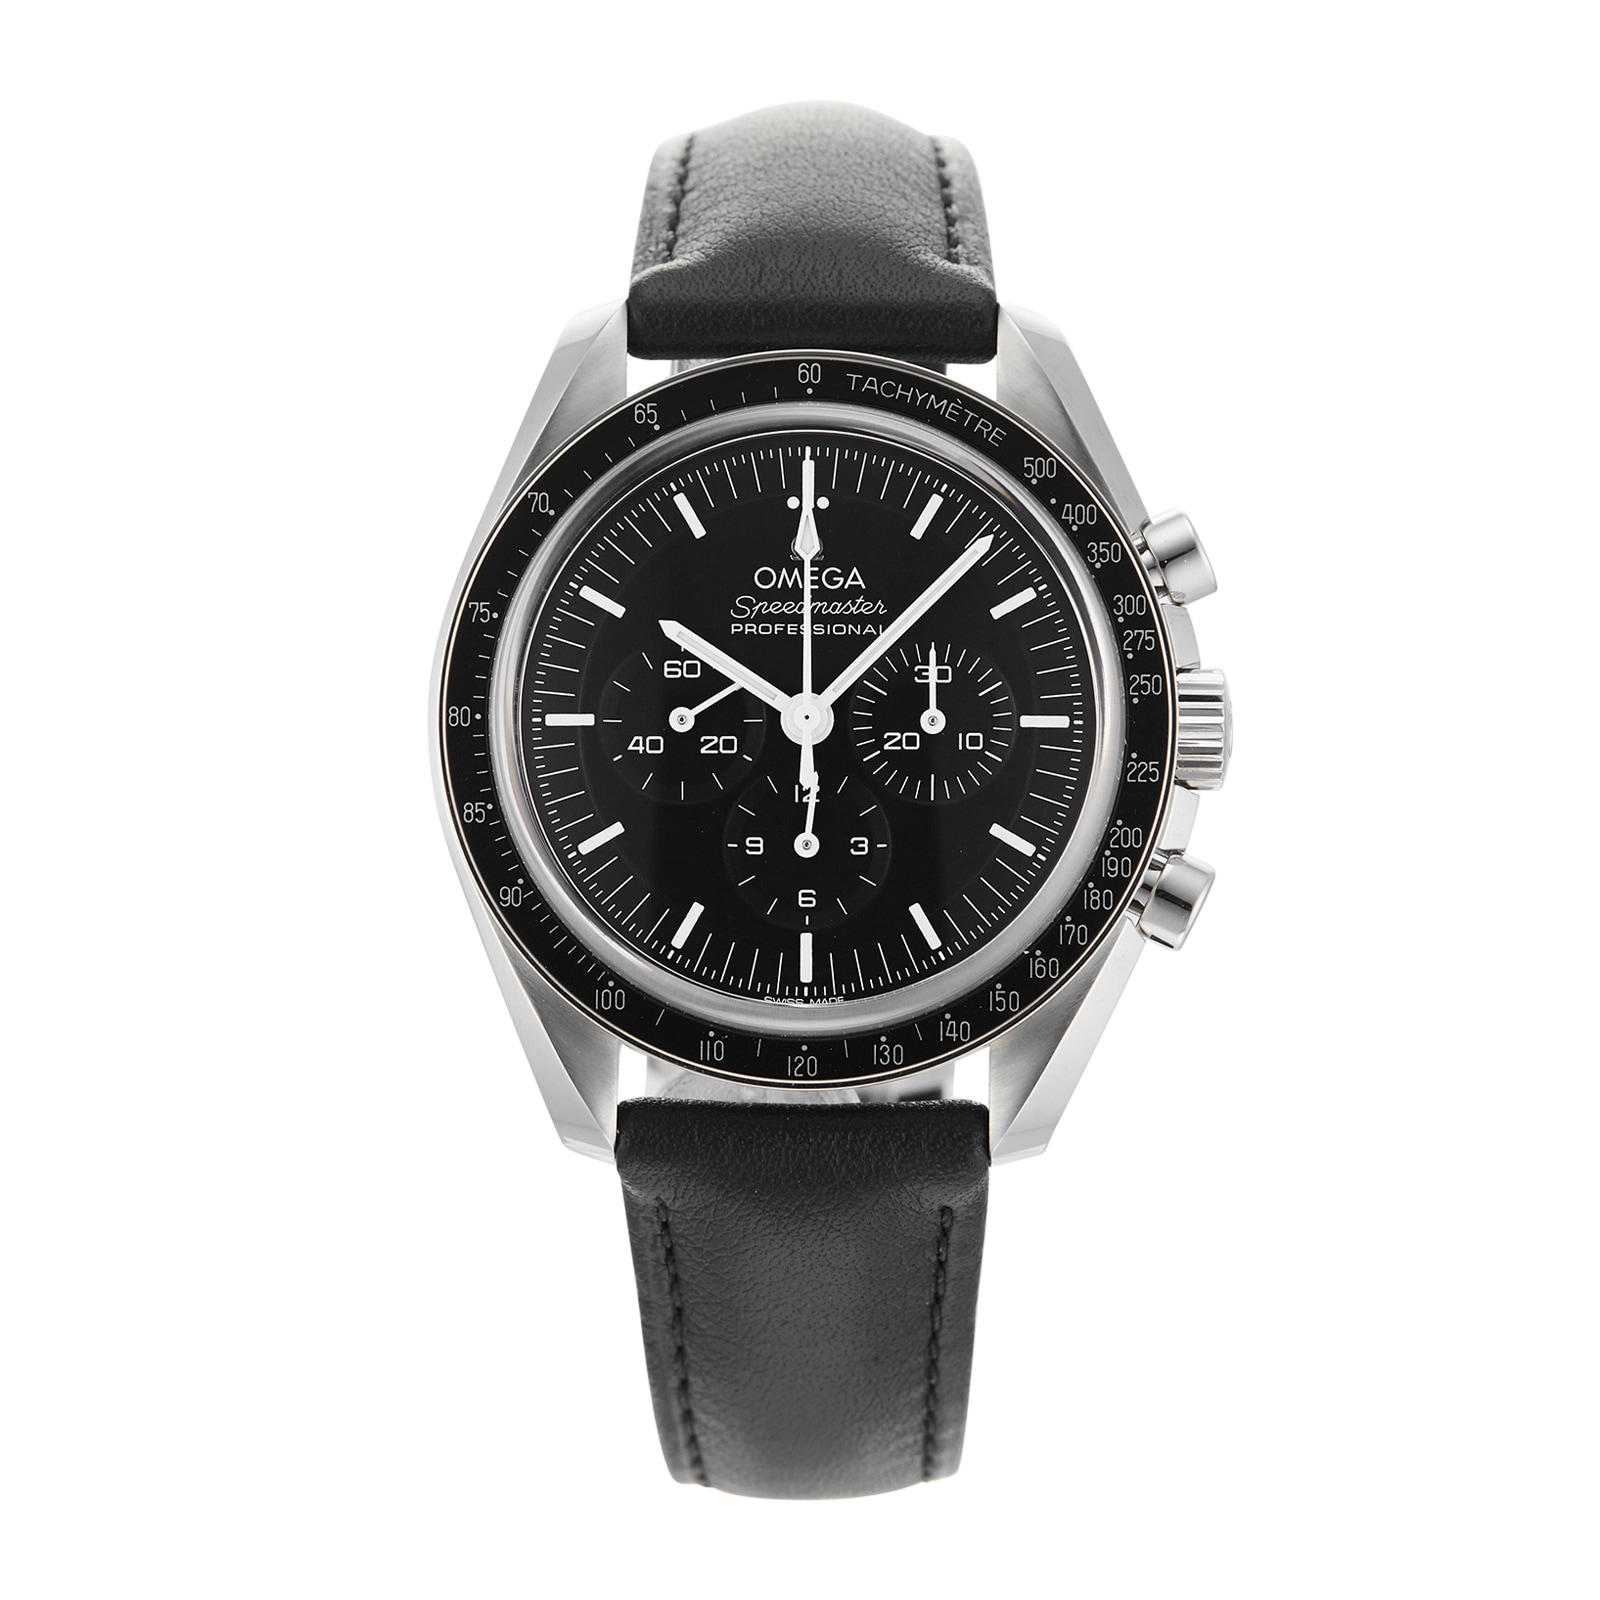 Pre-Owned Omega Speedmaster Moonwatch Professional Mens Watch 310.32.42.50.01.002